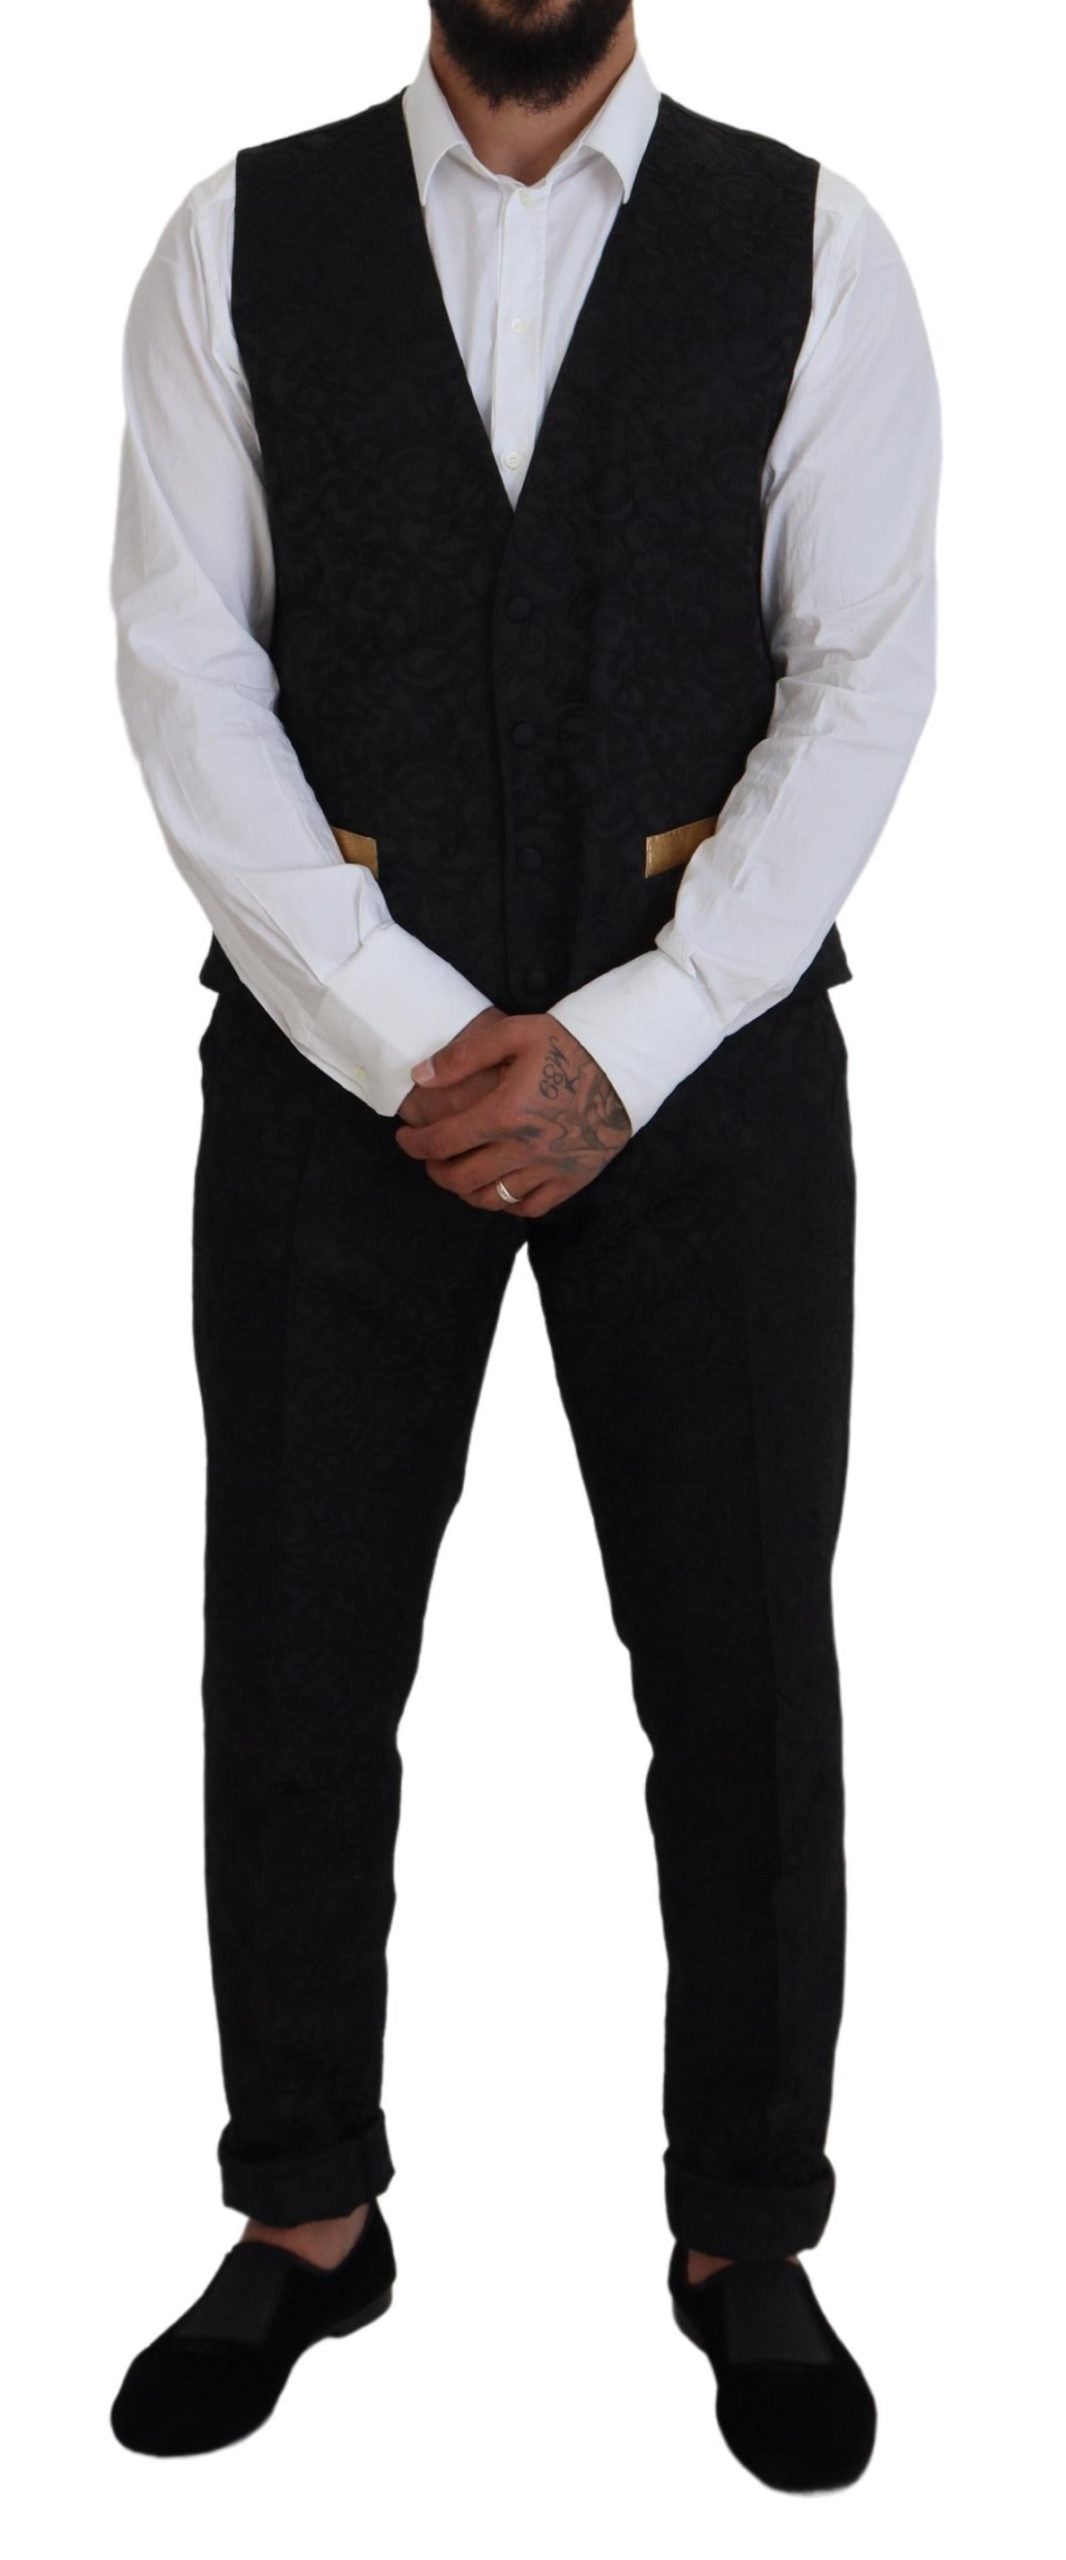 Dolce & Gabbana Men's Black Gold Fantasy Tuxedo Slim Fit Suit - Designed by Dolce & Gabbana Available to Buy at a Discounted Price on Moon Behind The Hill Online Designer Discount Store